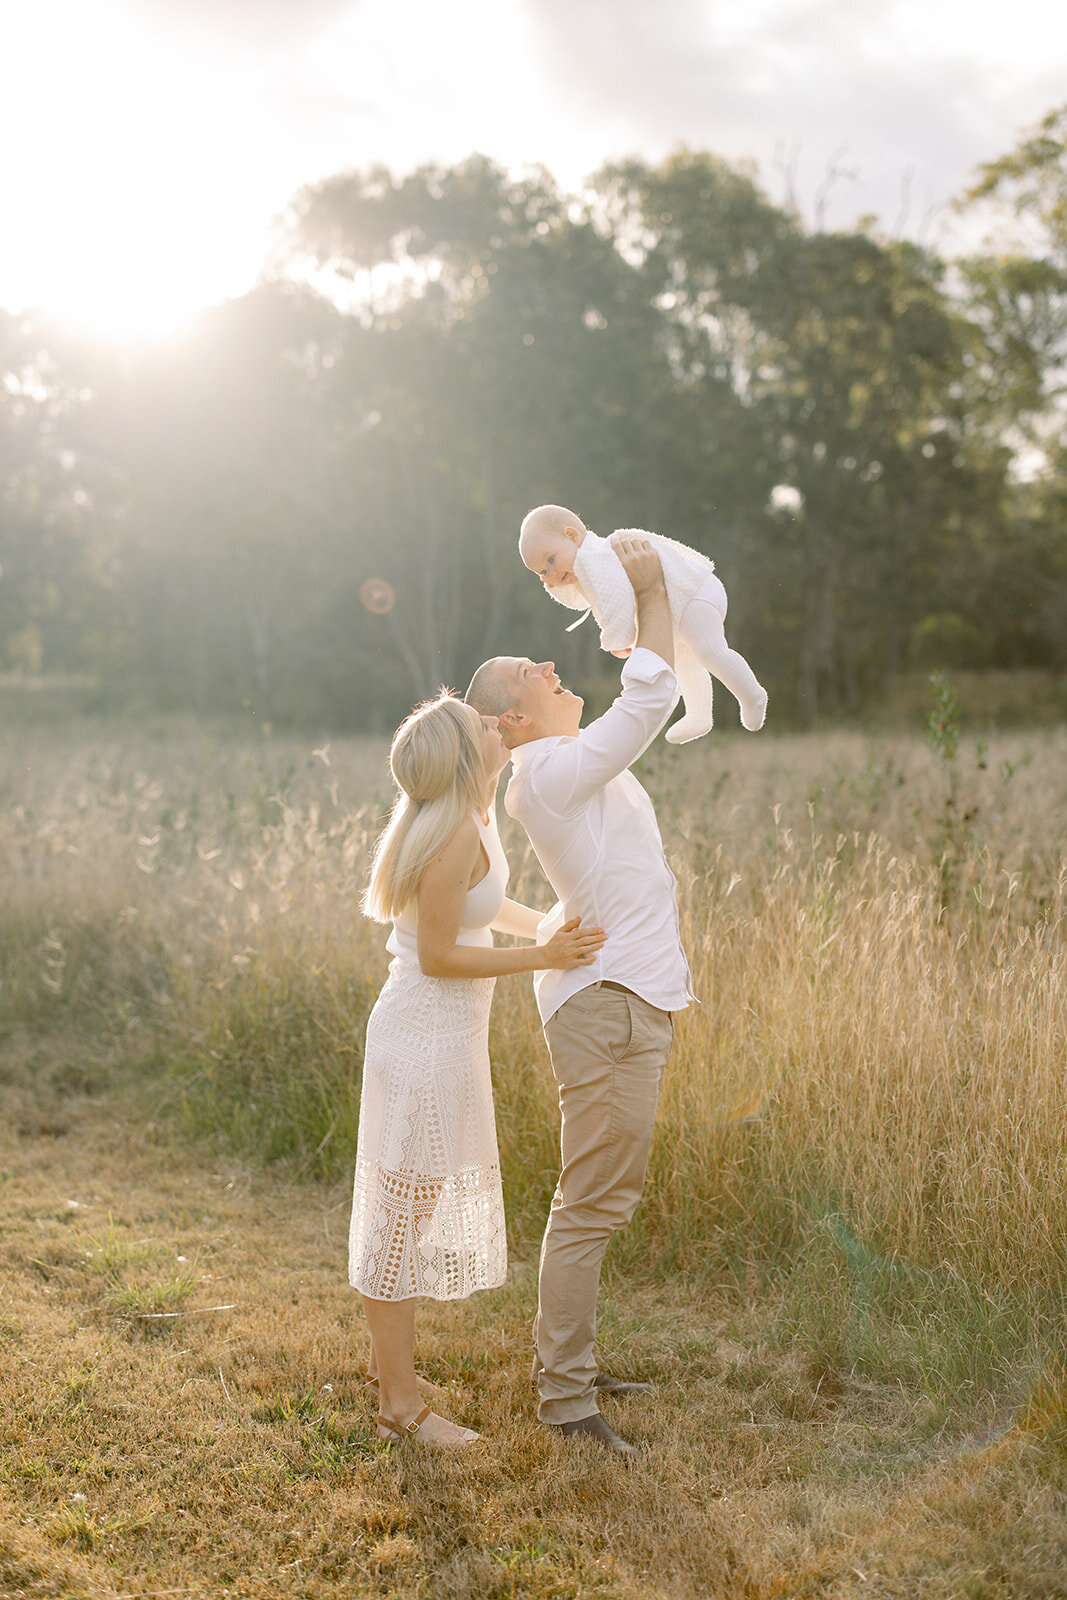 Dad lifting his baby girl in the air in a golden field